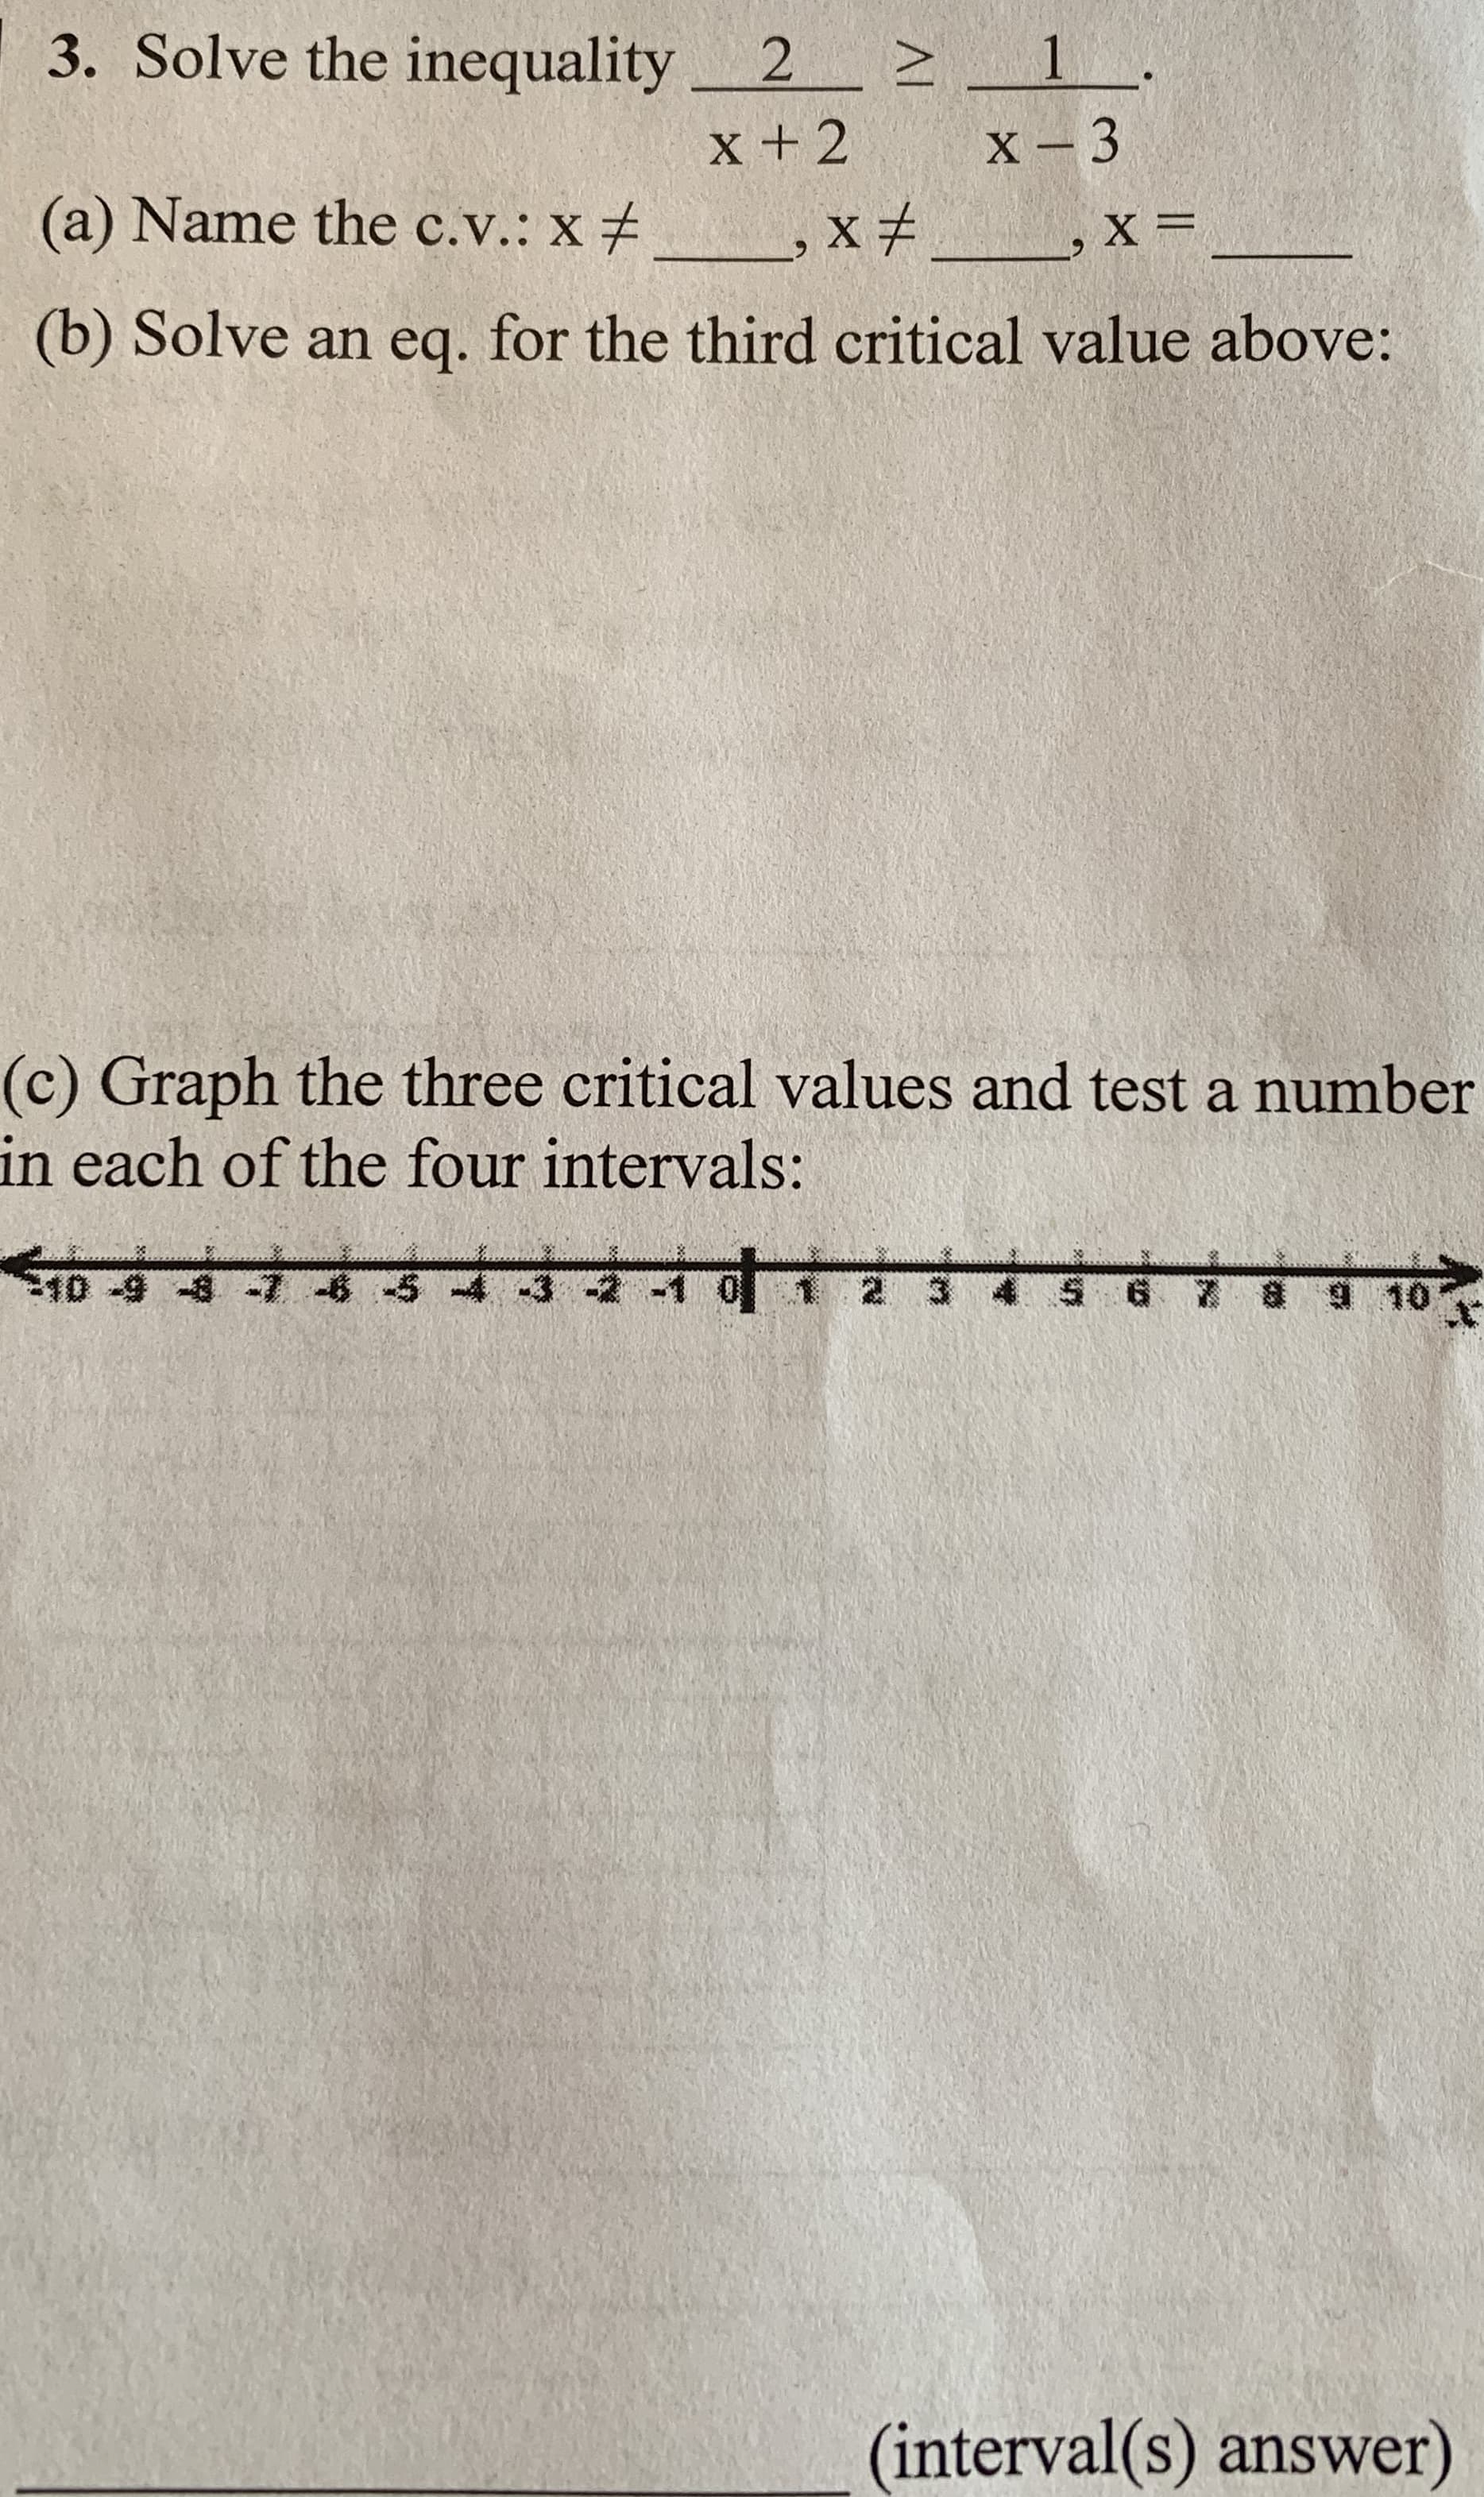 3. Solve the inequality 2
>_1_.
x +2
(a) Name the c.v.: Xx #
(b) Solve an eq. for the third critical value above:
(c) Graph the three critical values and test a number
in each of the four intervals:
সট ও
न ॐ 3
3
न गं
2.
(interval(s) answer)
